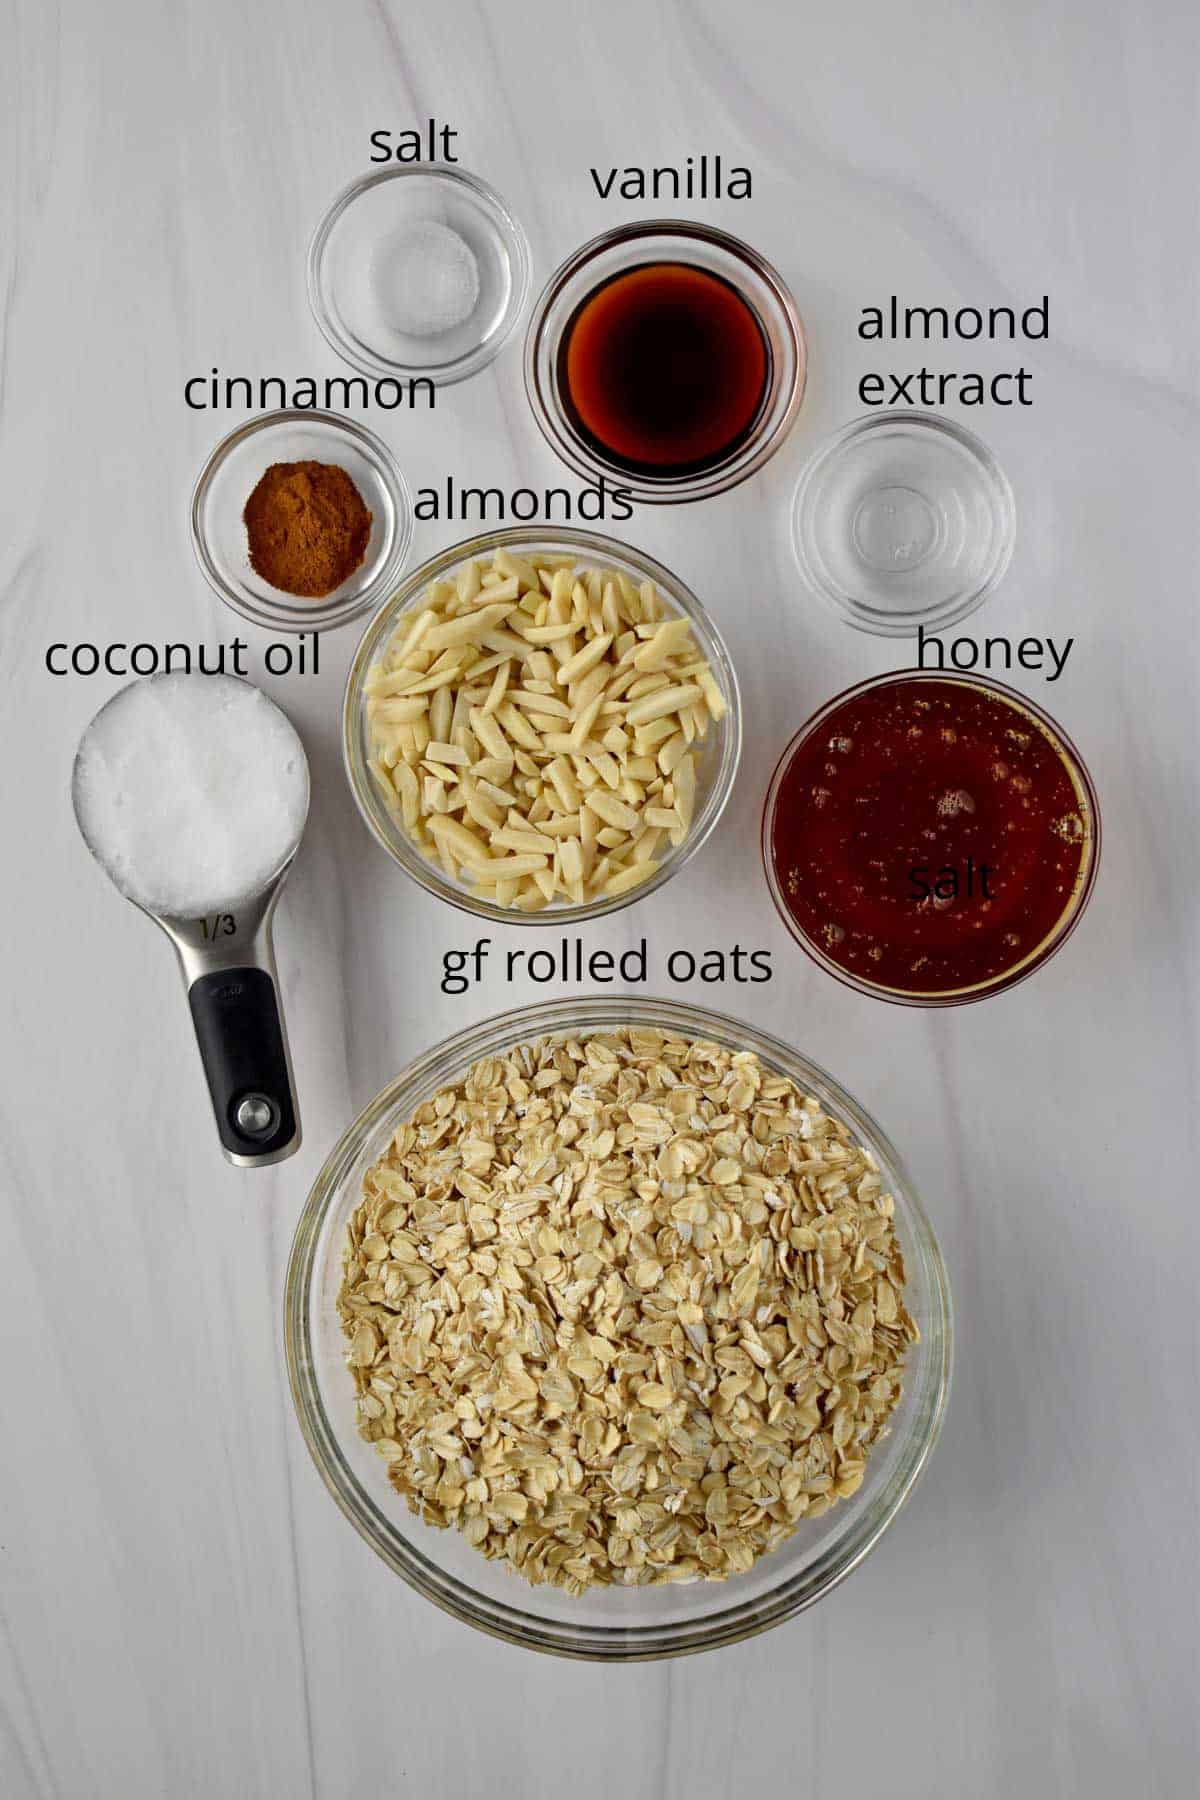 Ingredients, with labels, for vanilla almond granola.